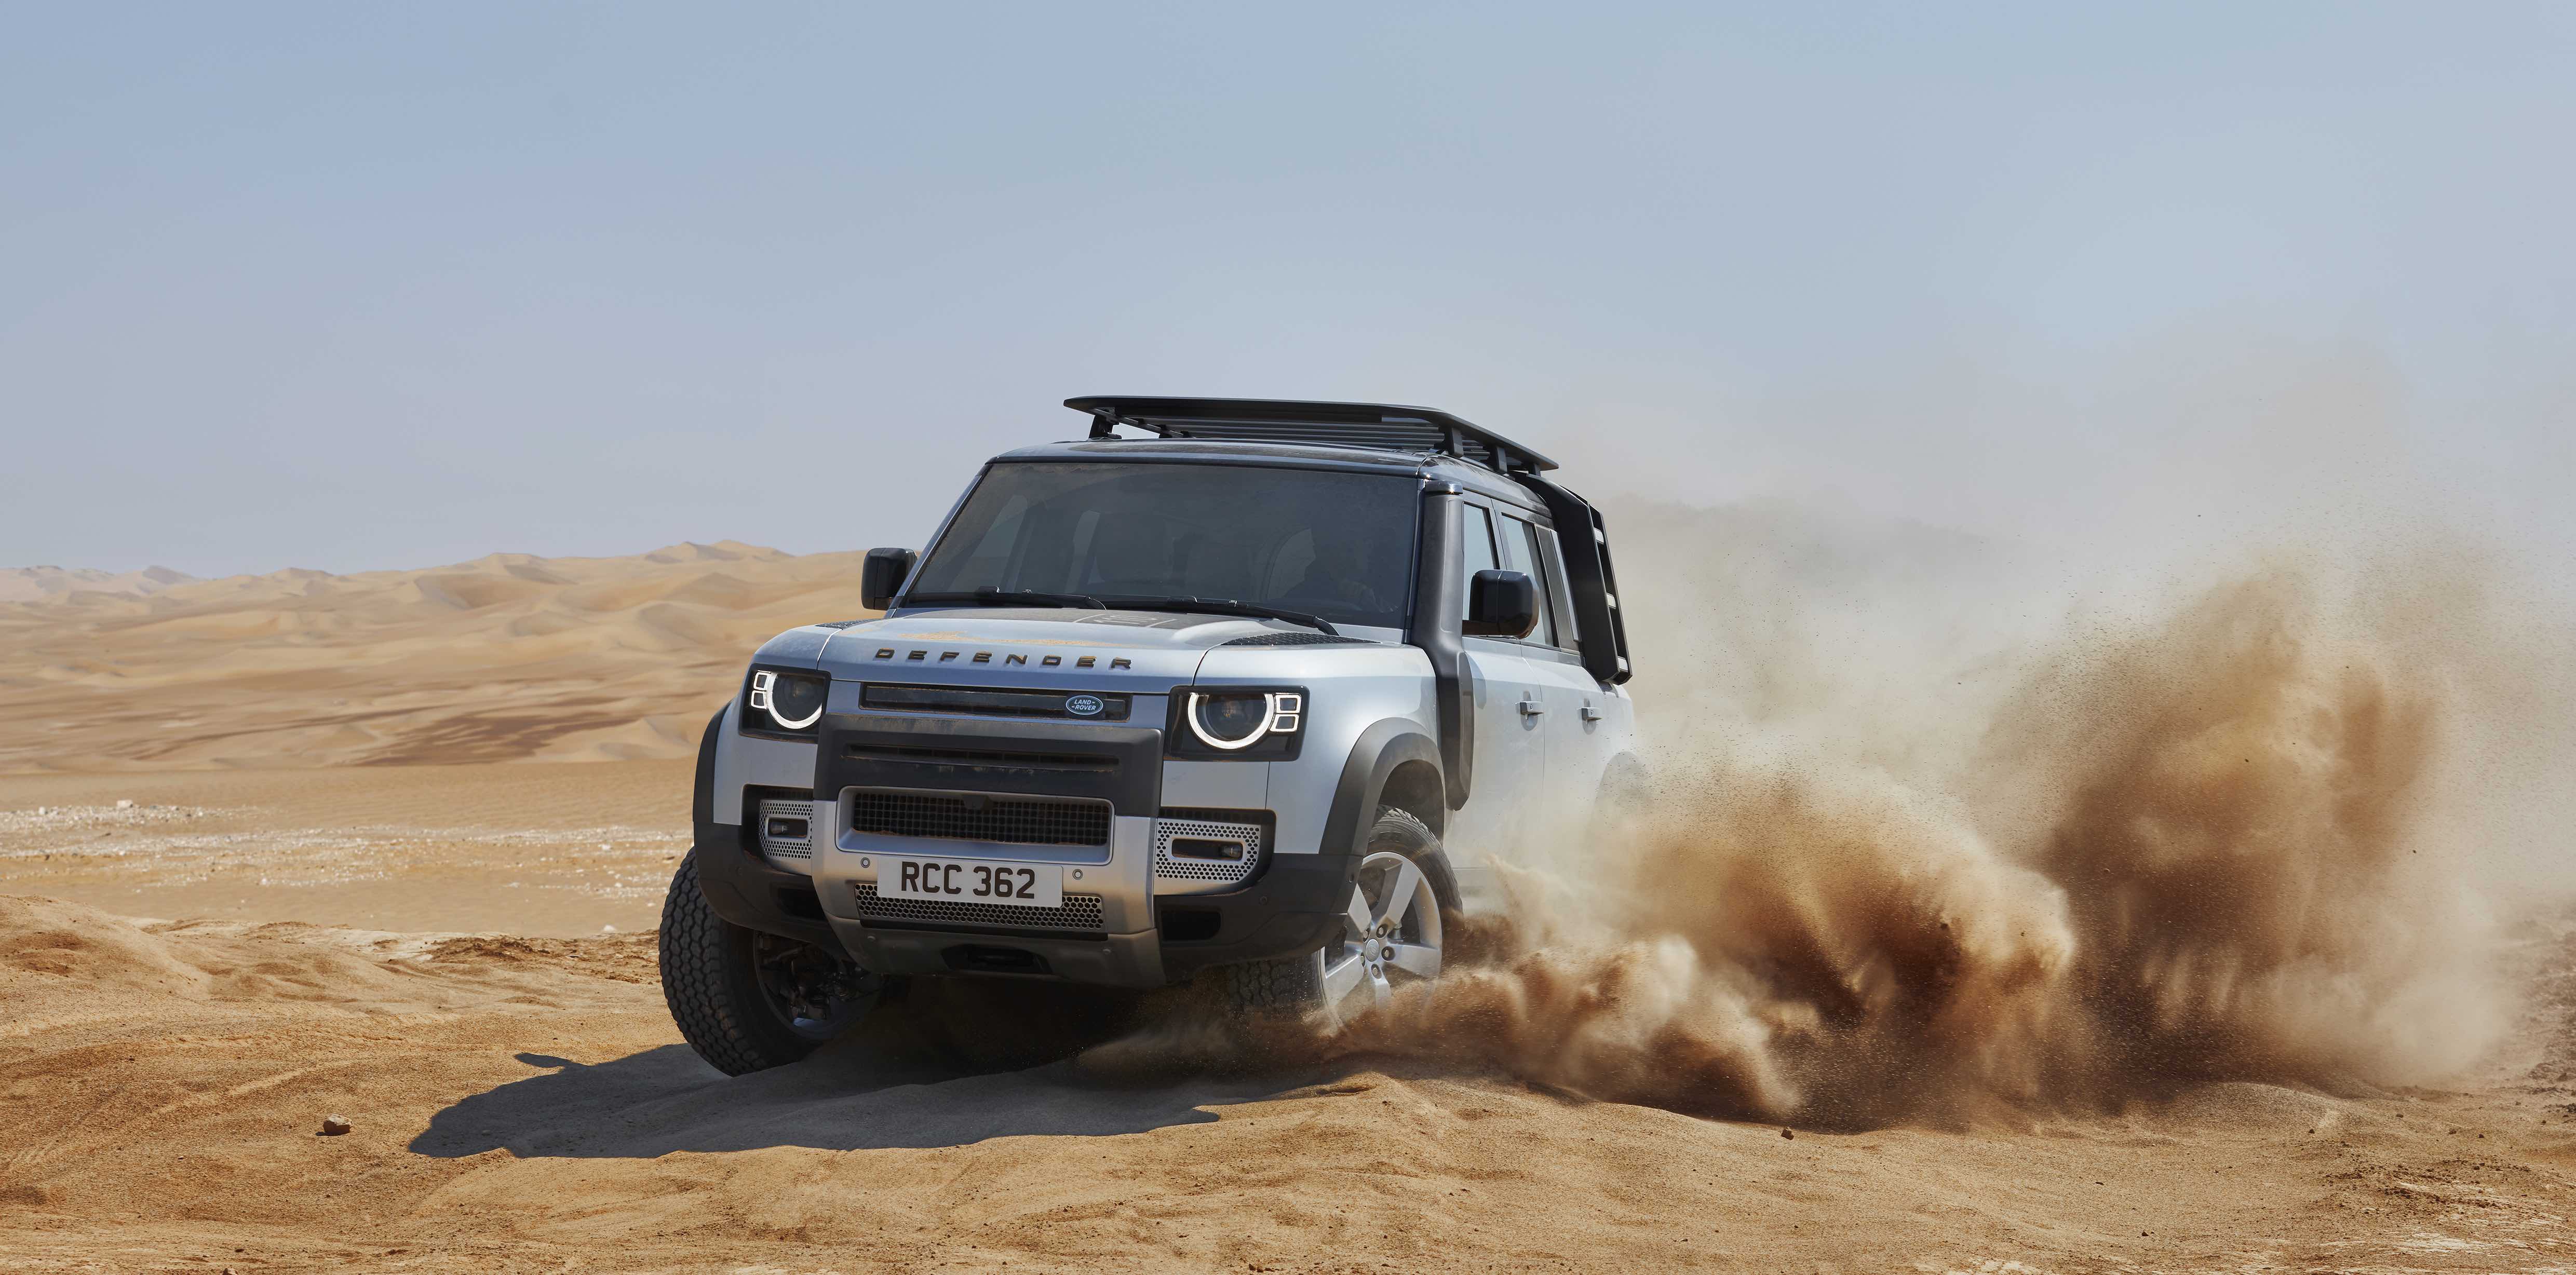 Land Rover Defender Image Specs Price And Uk Release